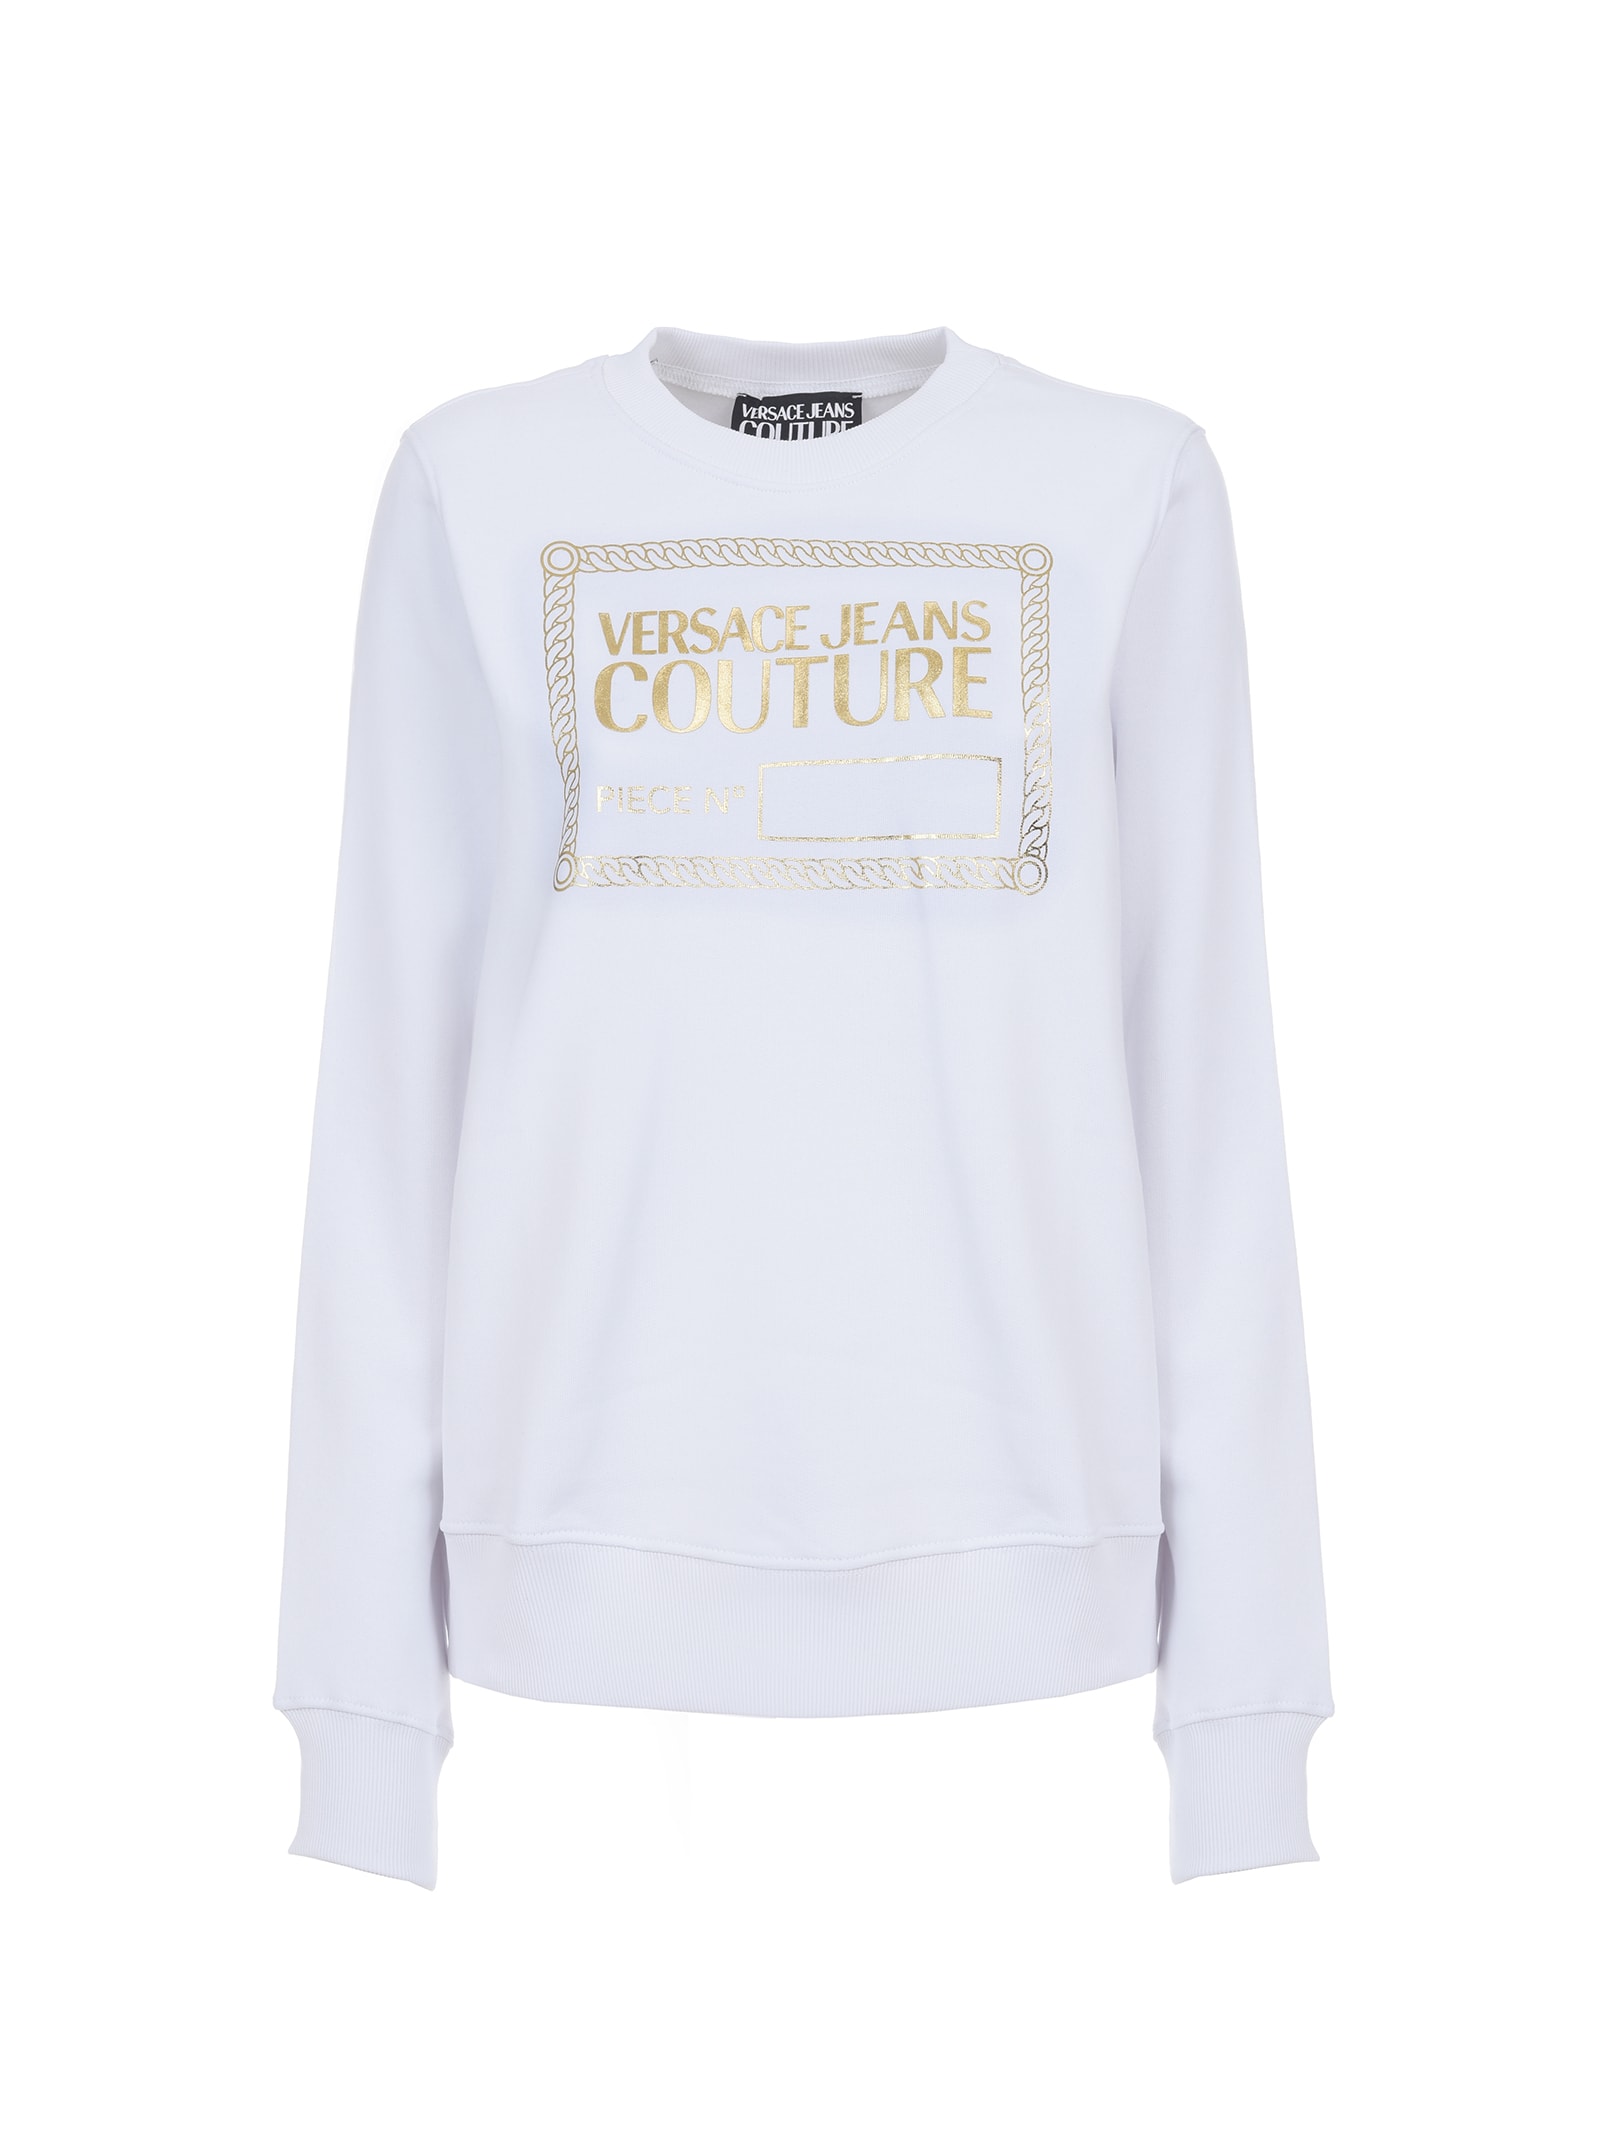 Versace Jeans Couture White Sweatshirt With Gold Logo